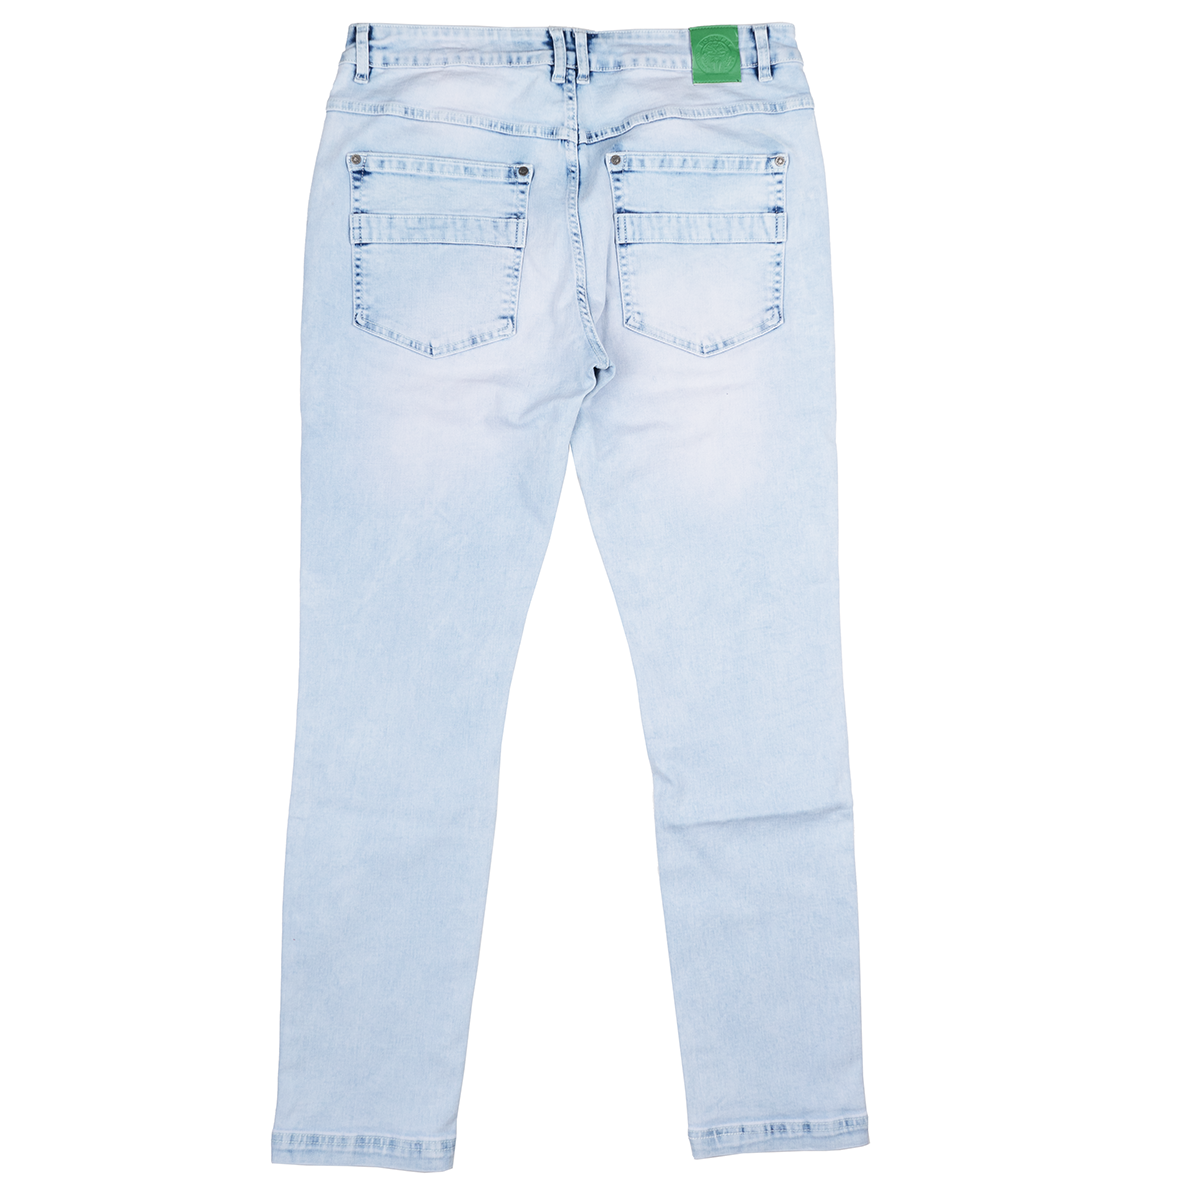 BORN FLY JEANS LT STONE WASH 2303D4617